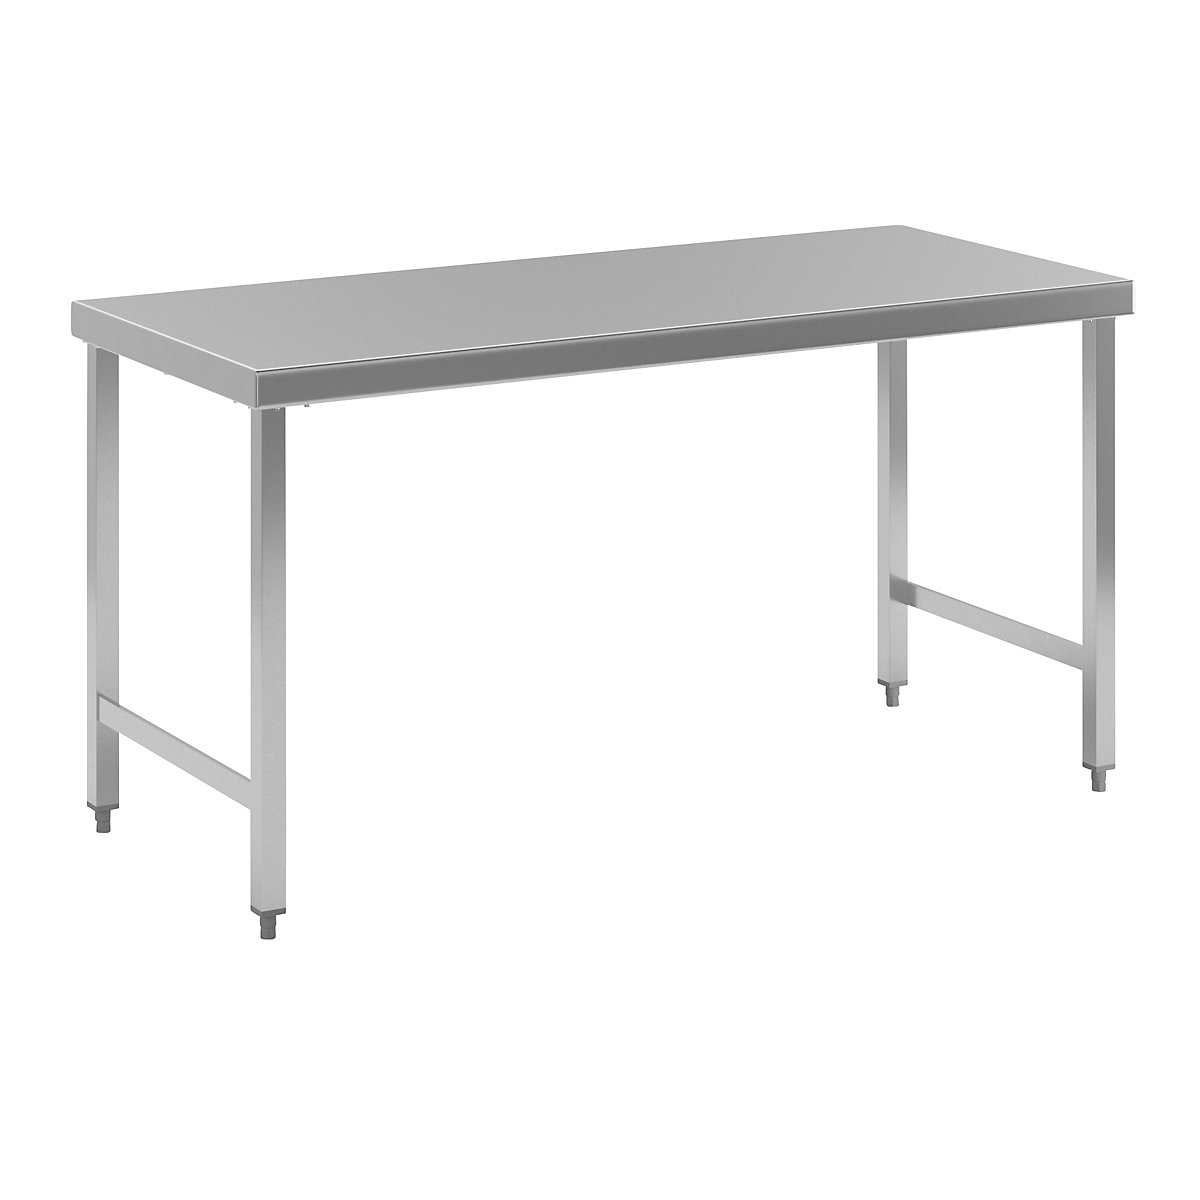 Stainless steel workbench, working height 850 mm, WxD 1600 x 700 mm, without shelf-12